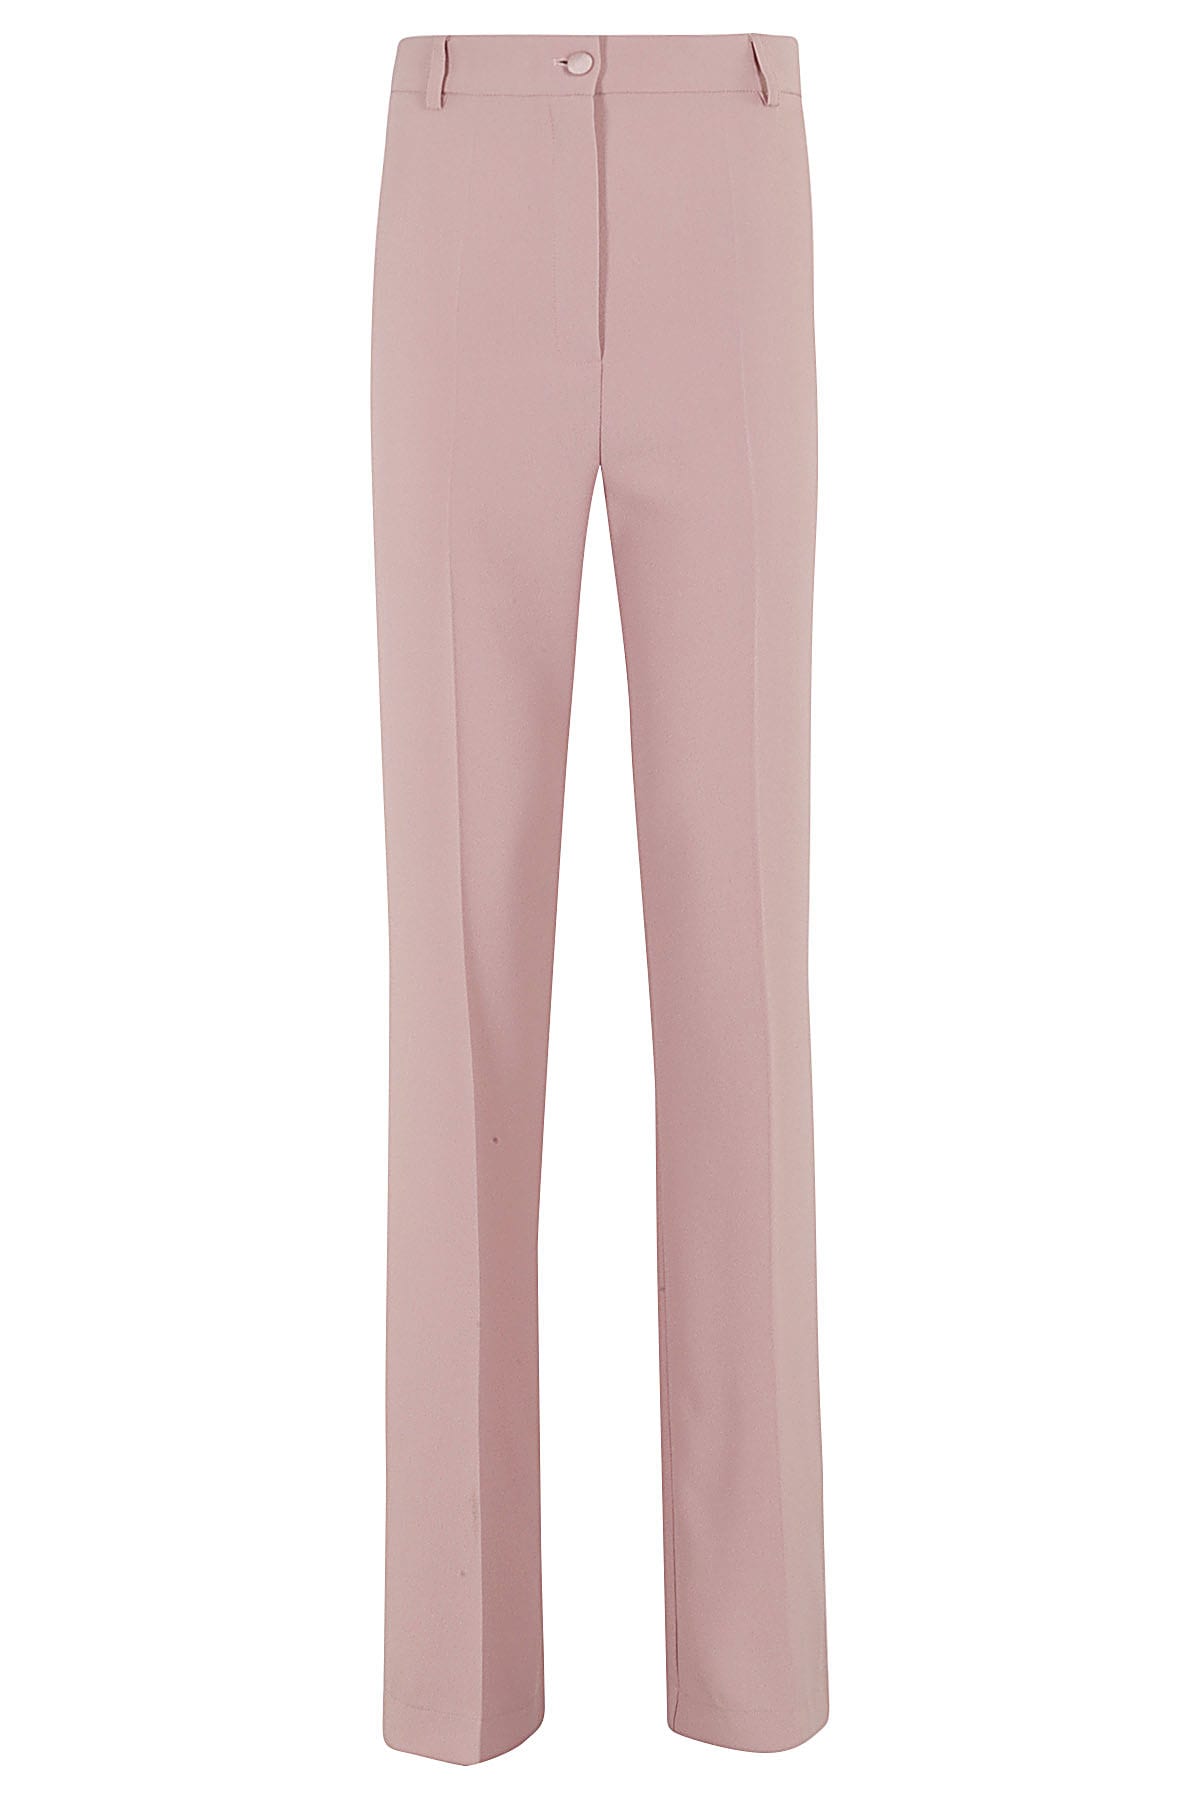 Shop Hebe Studio The Georgia Pant Cady In Powder Pink